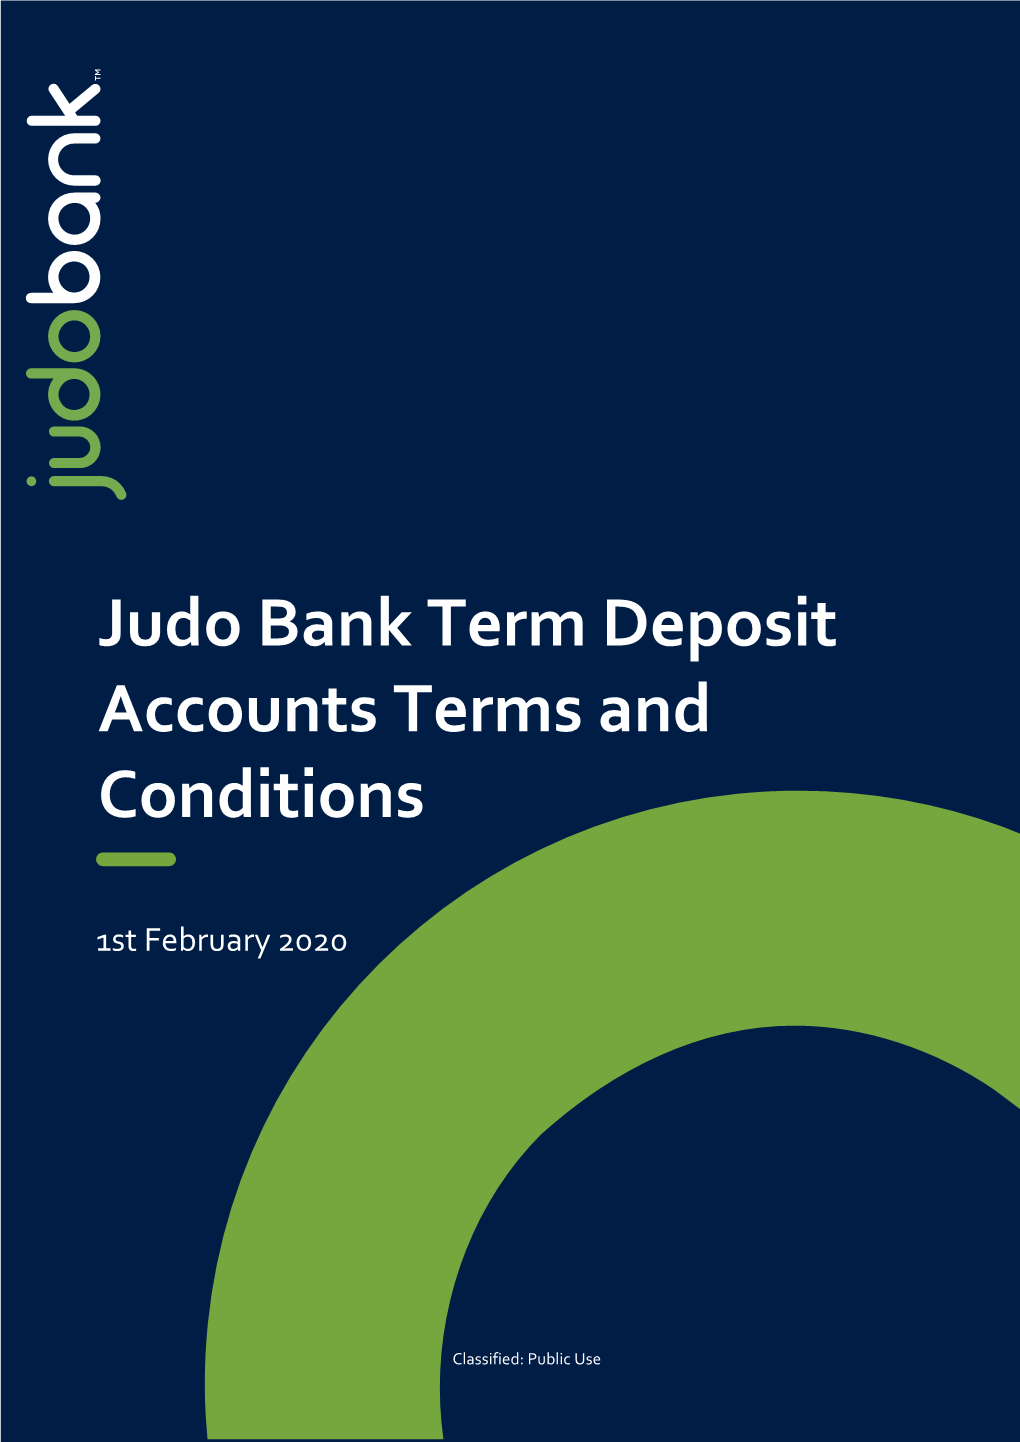 Judo Bank Term Deposit Accounts Terms and Conditions